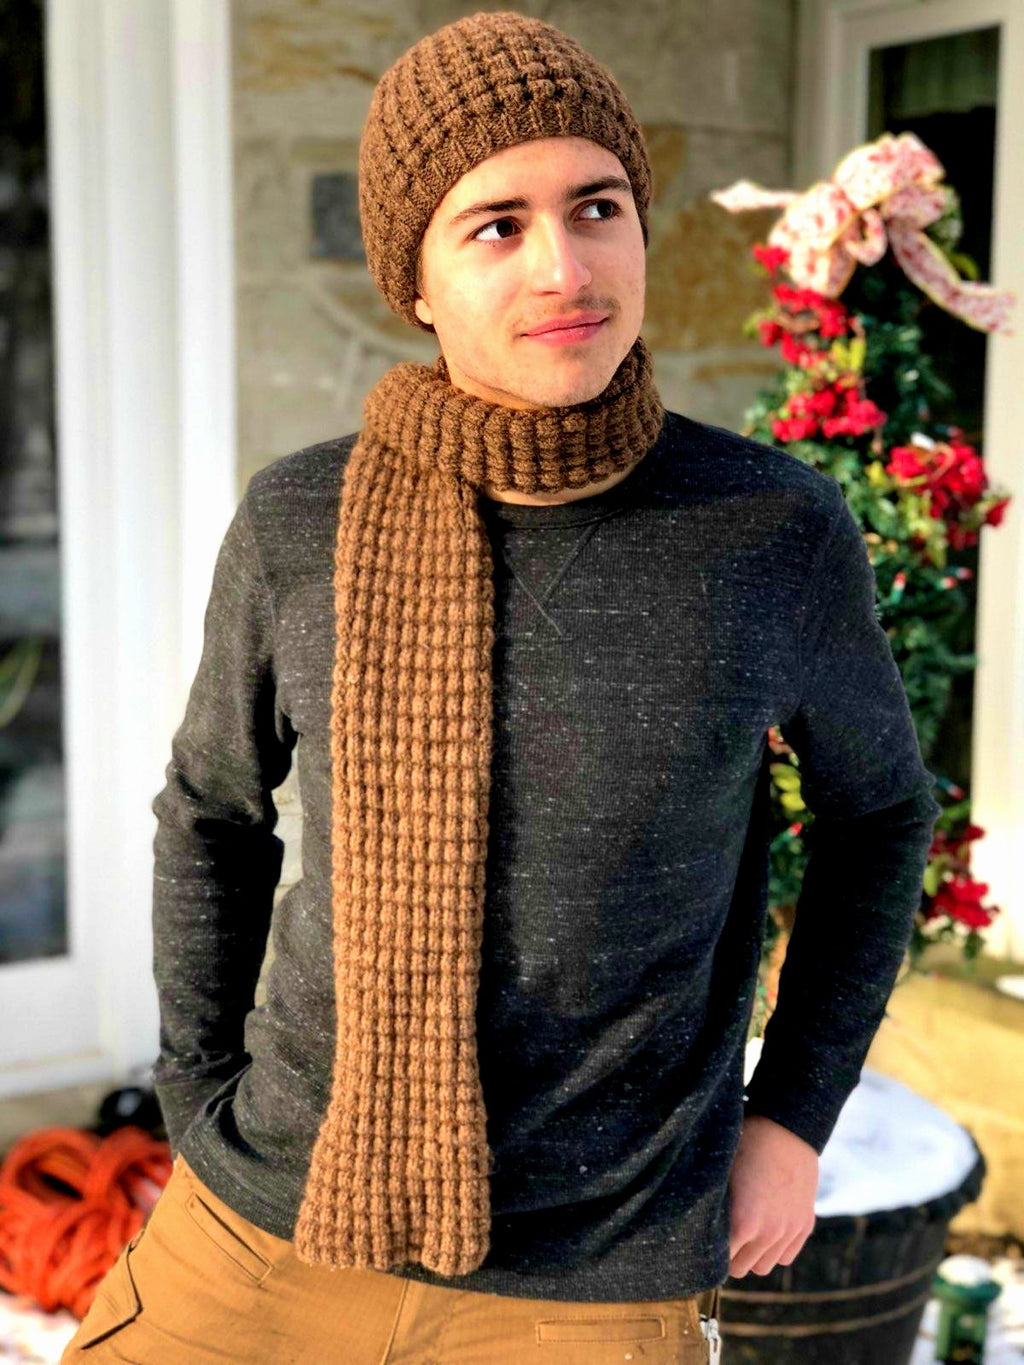 Drop Stitch Hat and Scarf - Designed by Kathy Zimmerman